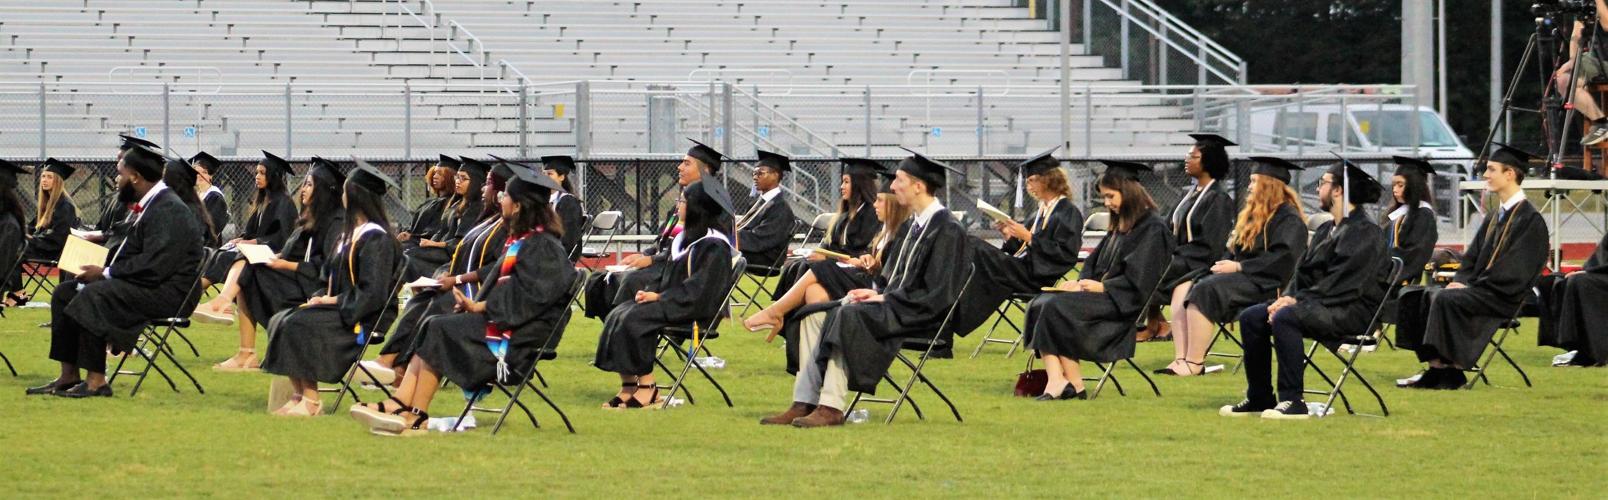 Union County Early College holds 2021 graduation ceremony, Local News